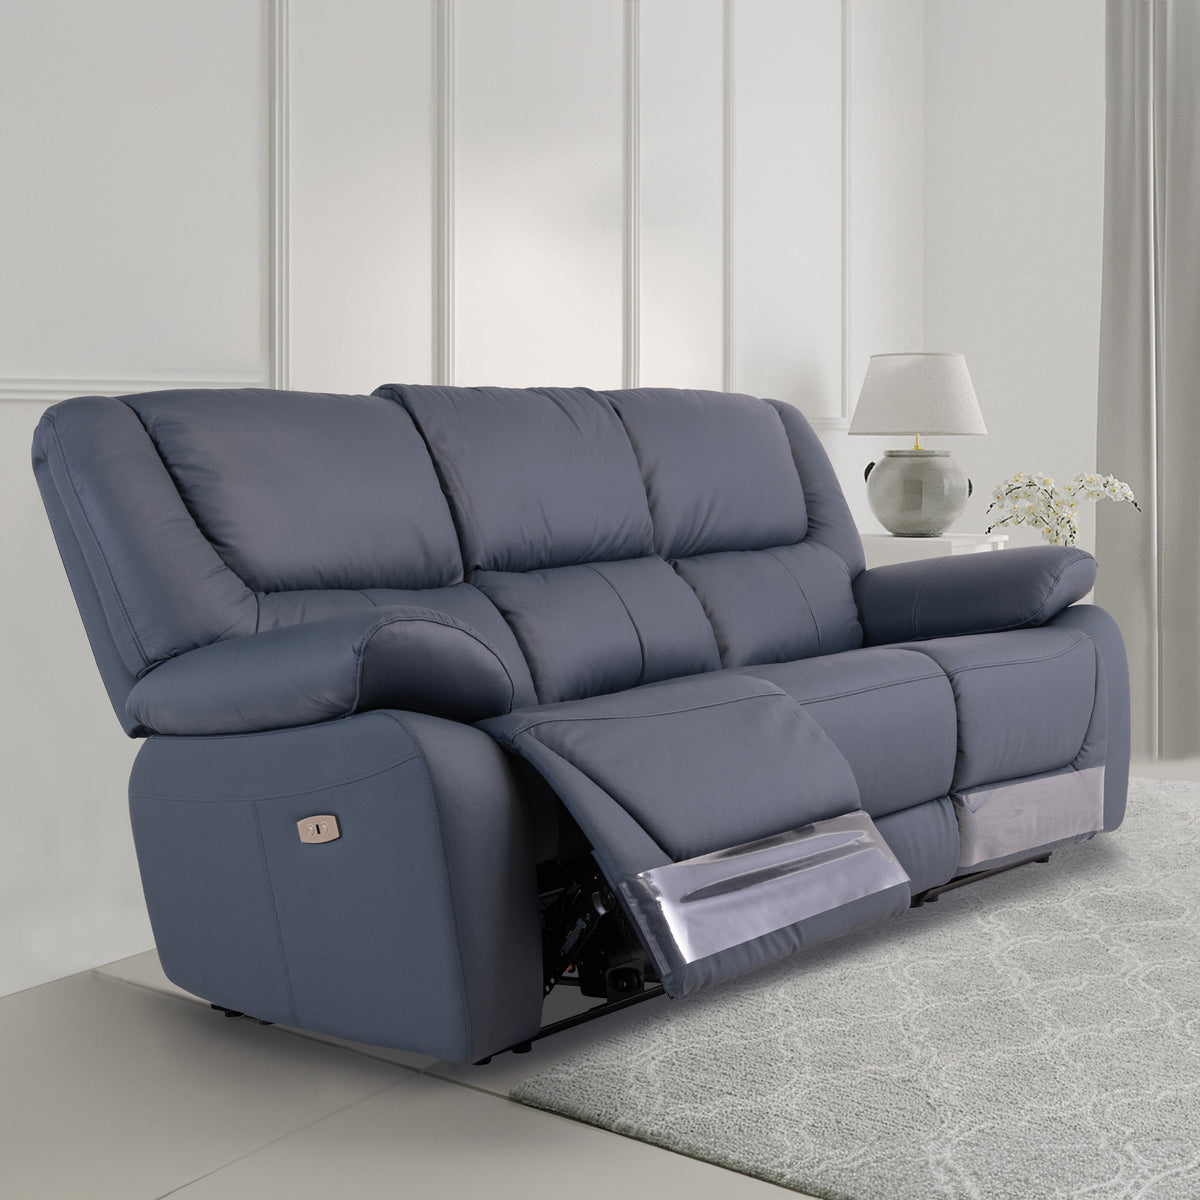 Baxter Charcoal Blue Leather Electric Reclining 3 Seater Couch for living room